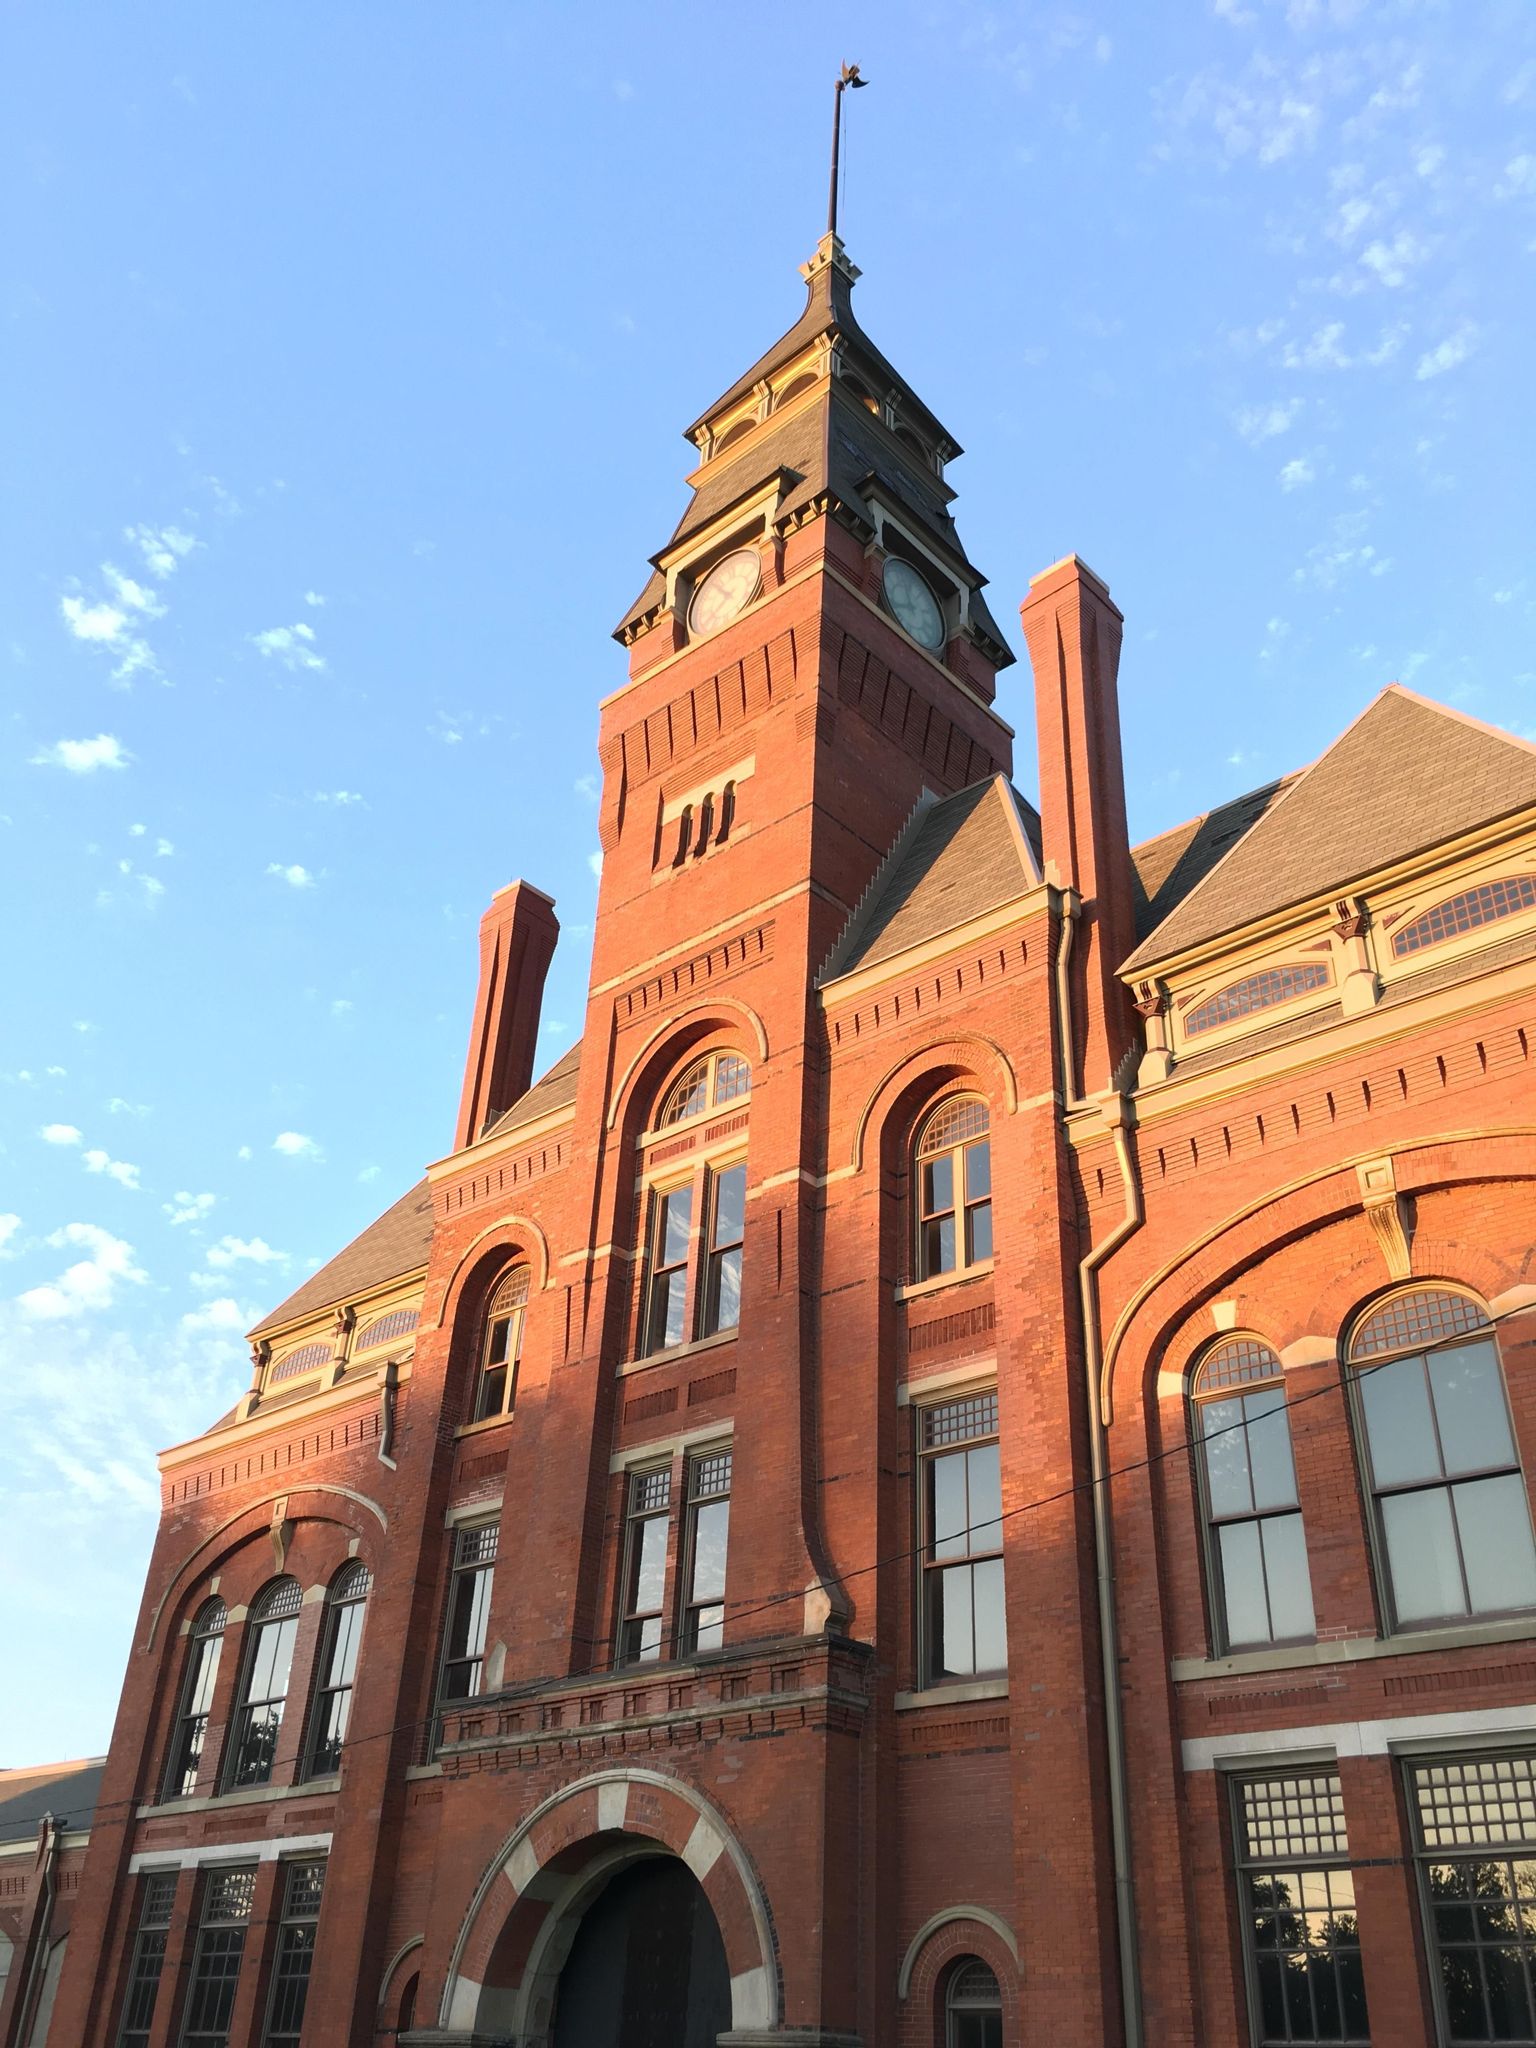 The iconic Pullman clocktower building is one of the central buildings of Pullman National Monument.